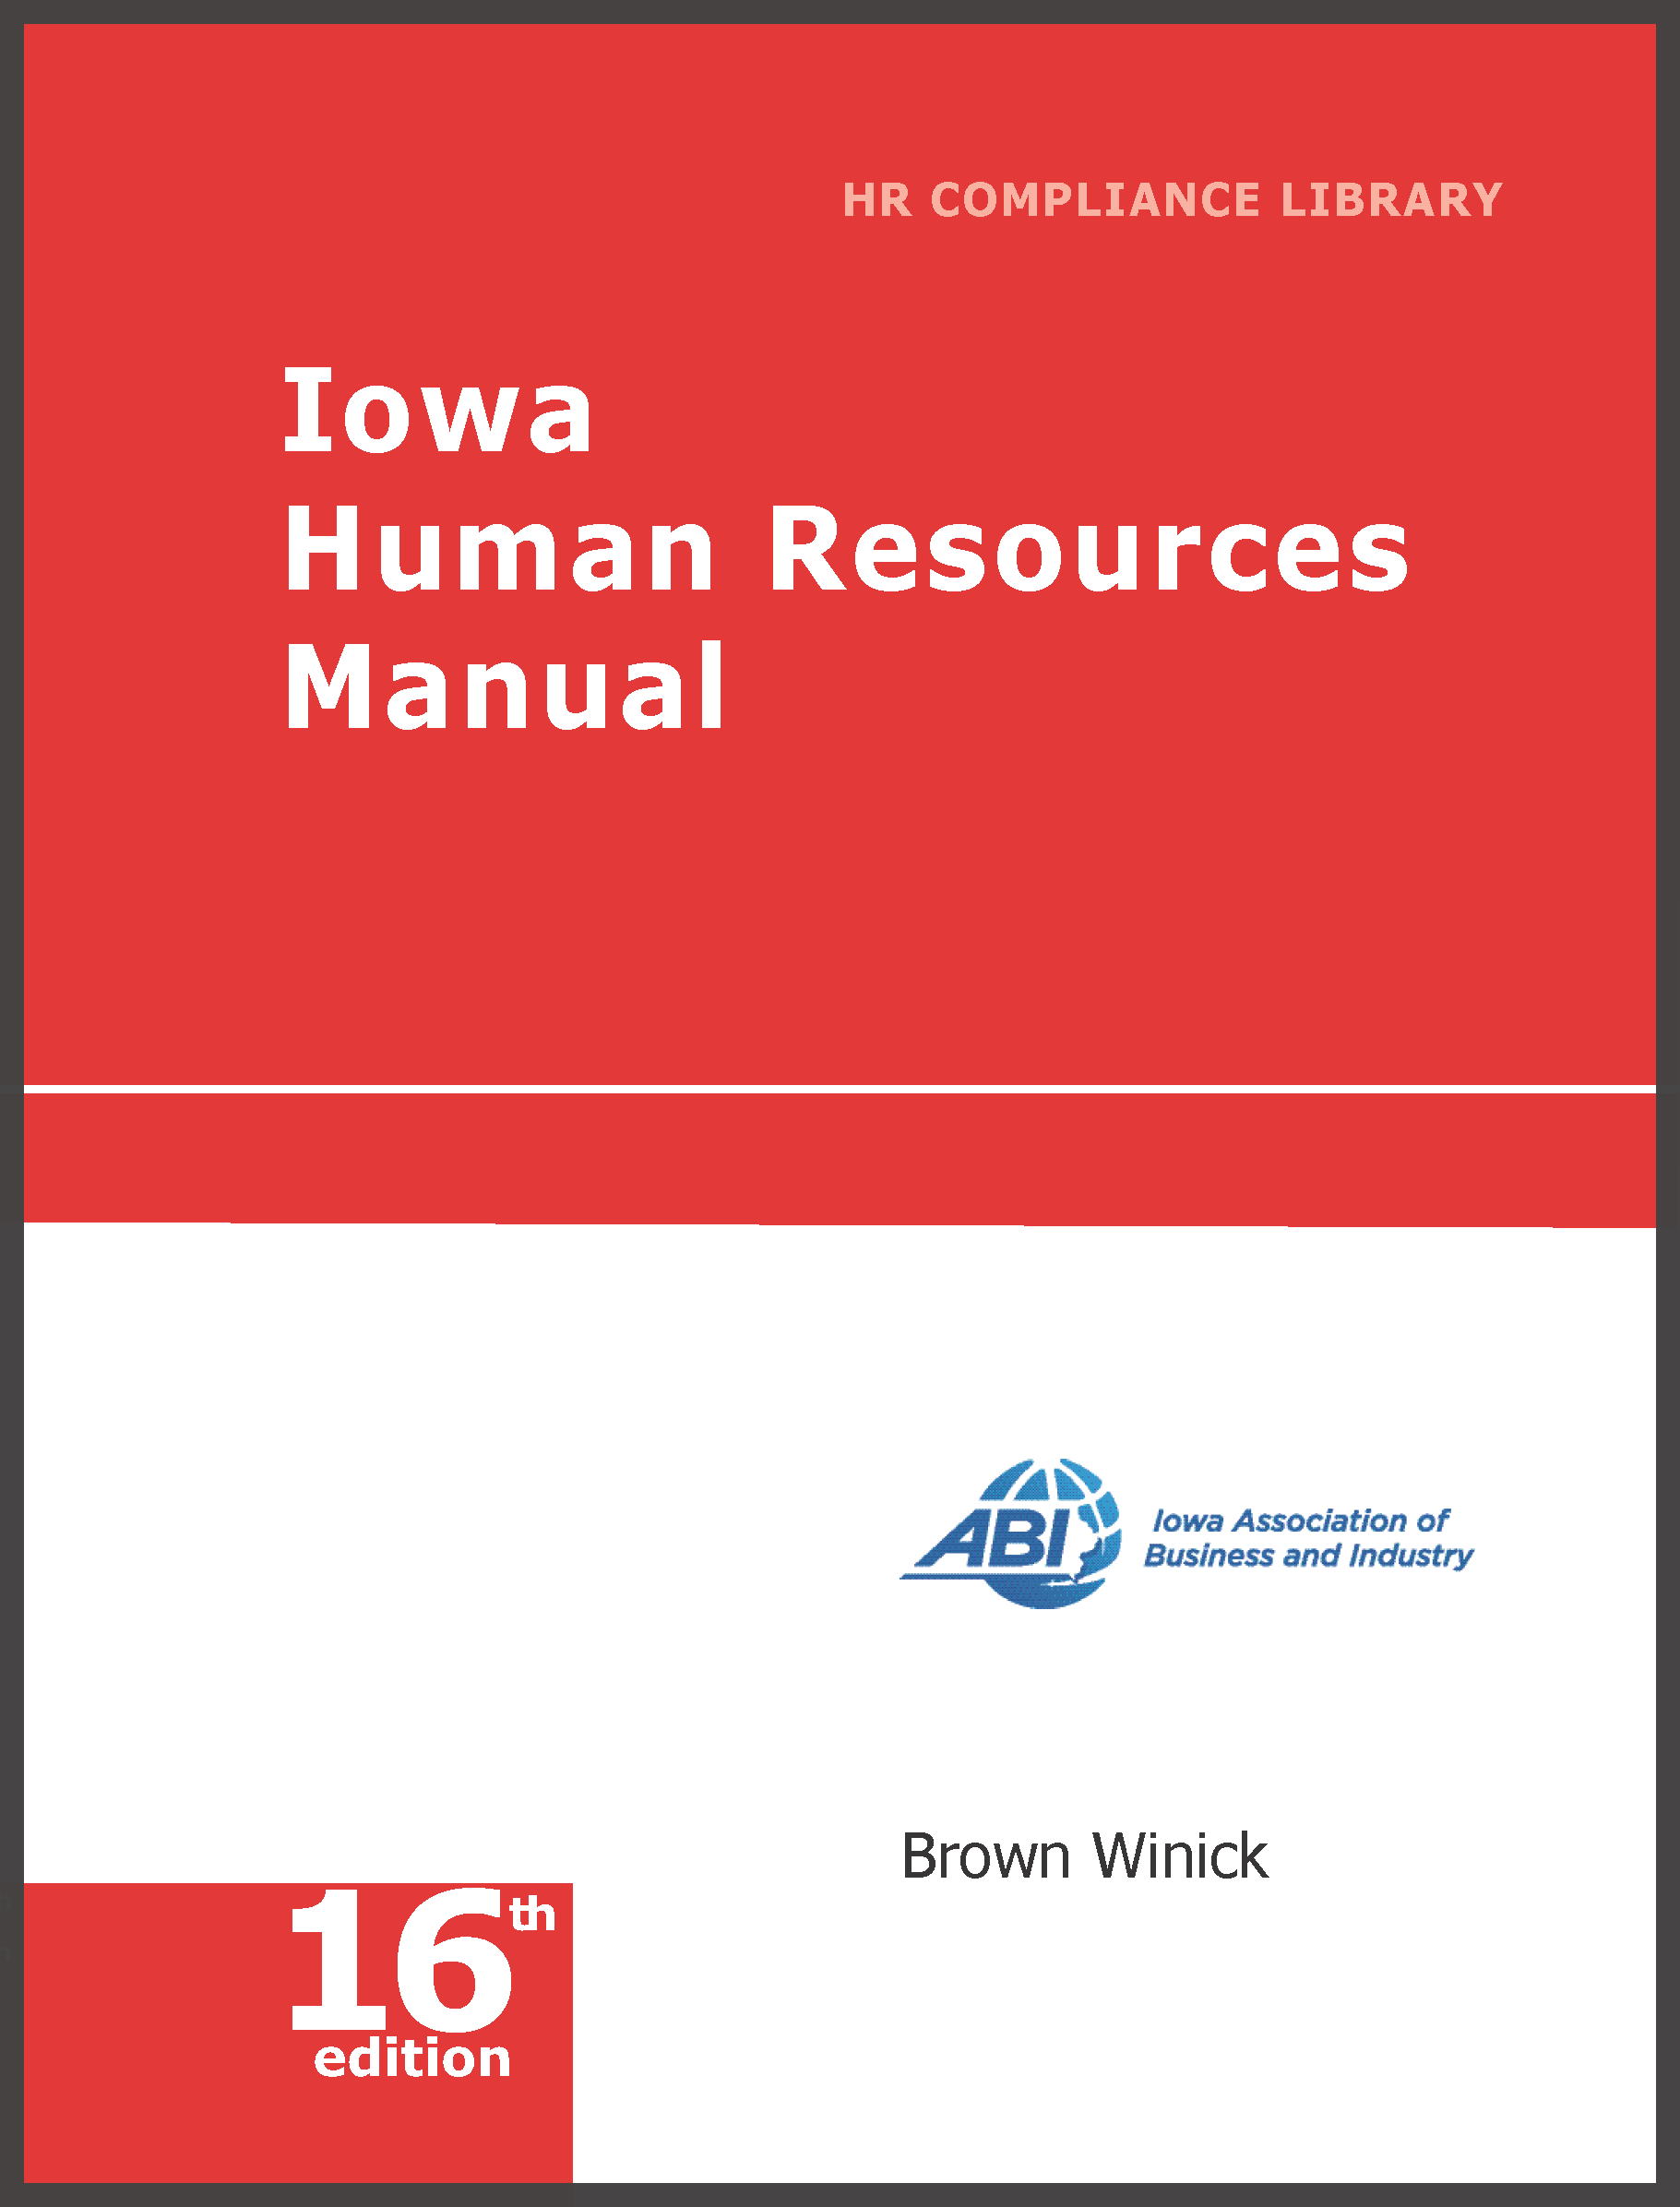 Iowa Free 7-Day Trial employment law image, remote work, labor laws, employment laws, right to work, order of protection, minimum wage